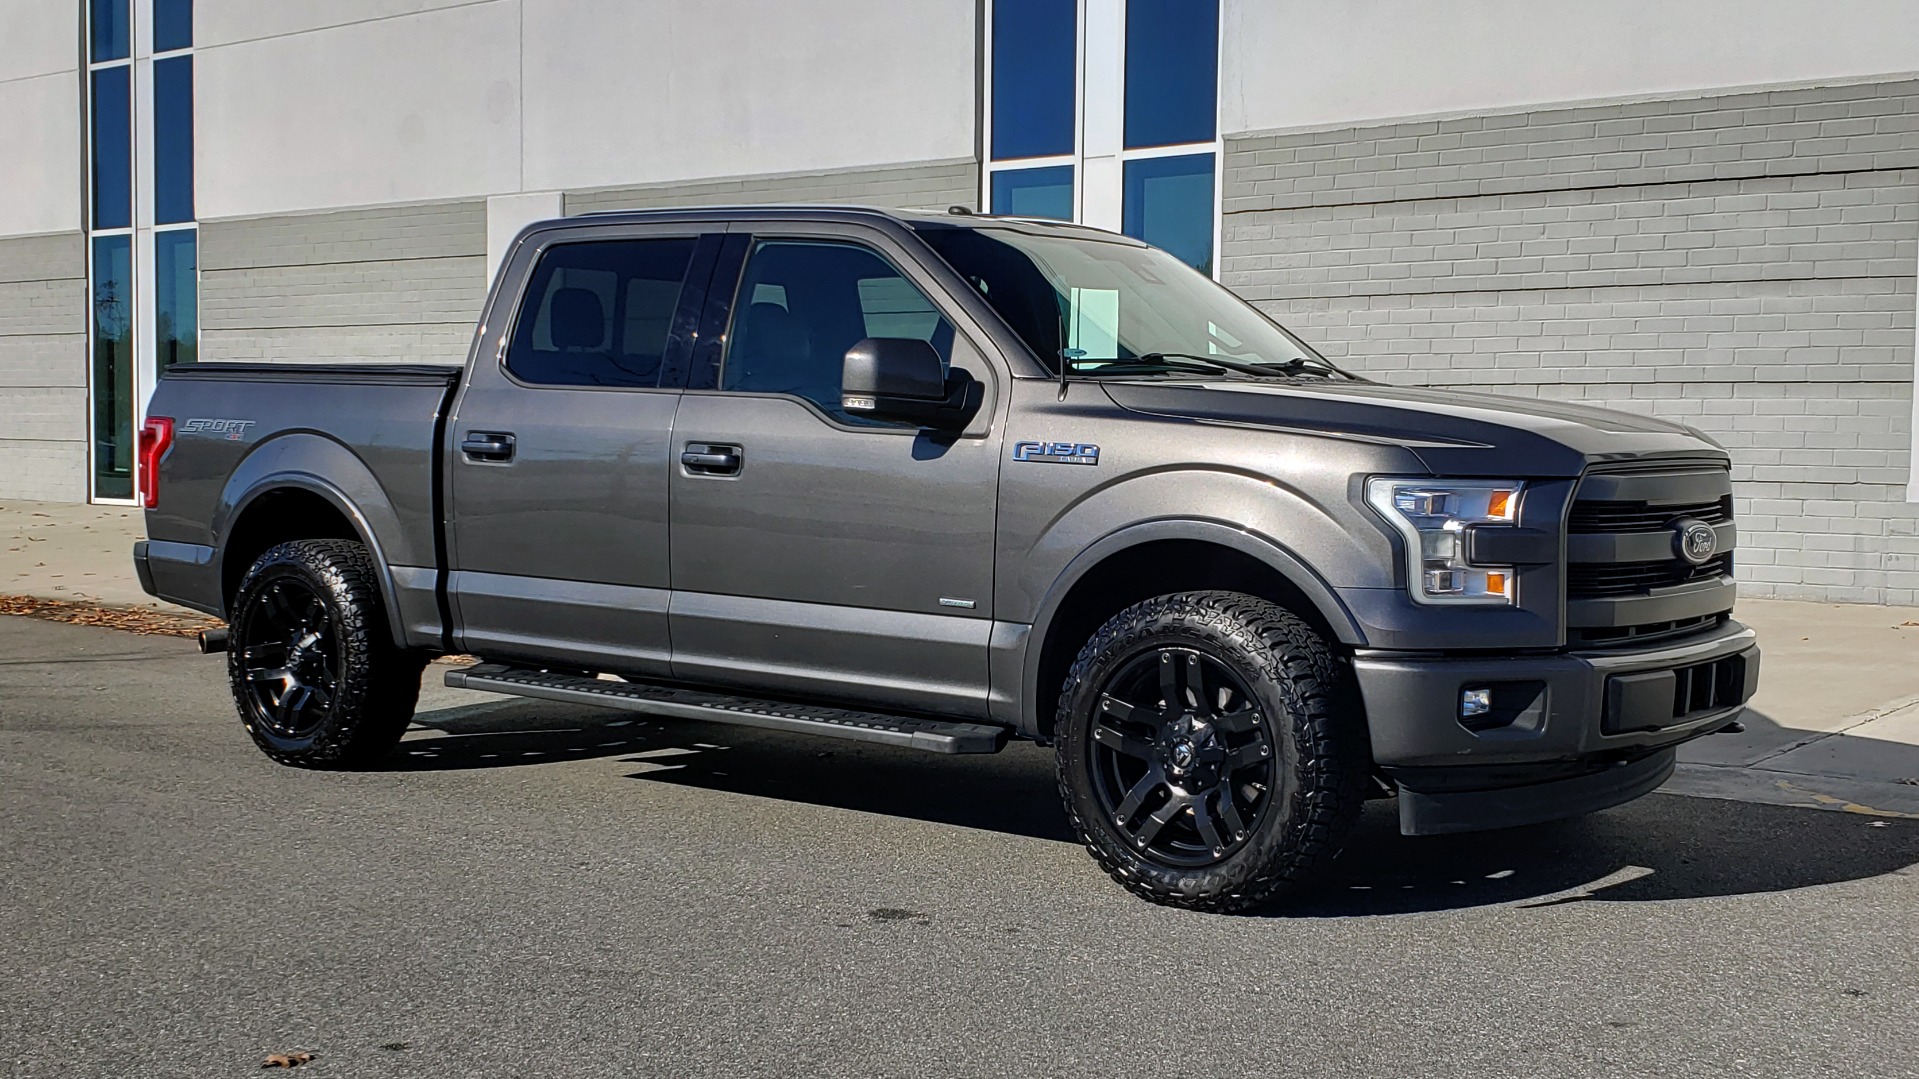 Used 2017 Ford F-150 LARIAT 4X4 SUPERCREW / 3.5L ECOBOOST / 10-SPD AUTO / NAV / SONY / REARVIEW for sale Sold at Formula Imports in Charlotte NC 28227 6